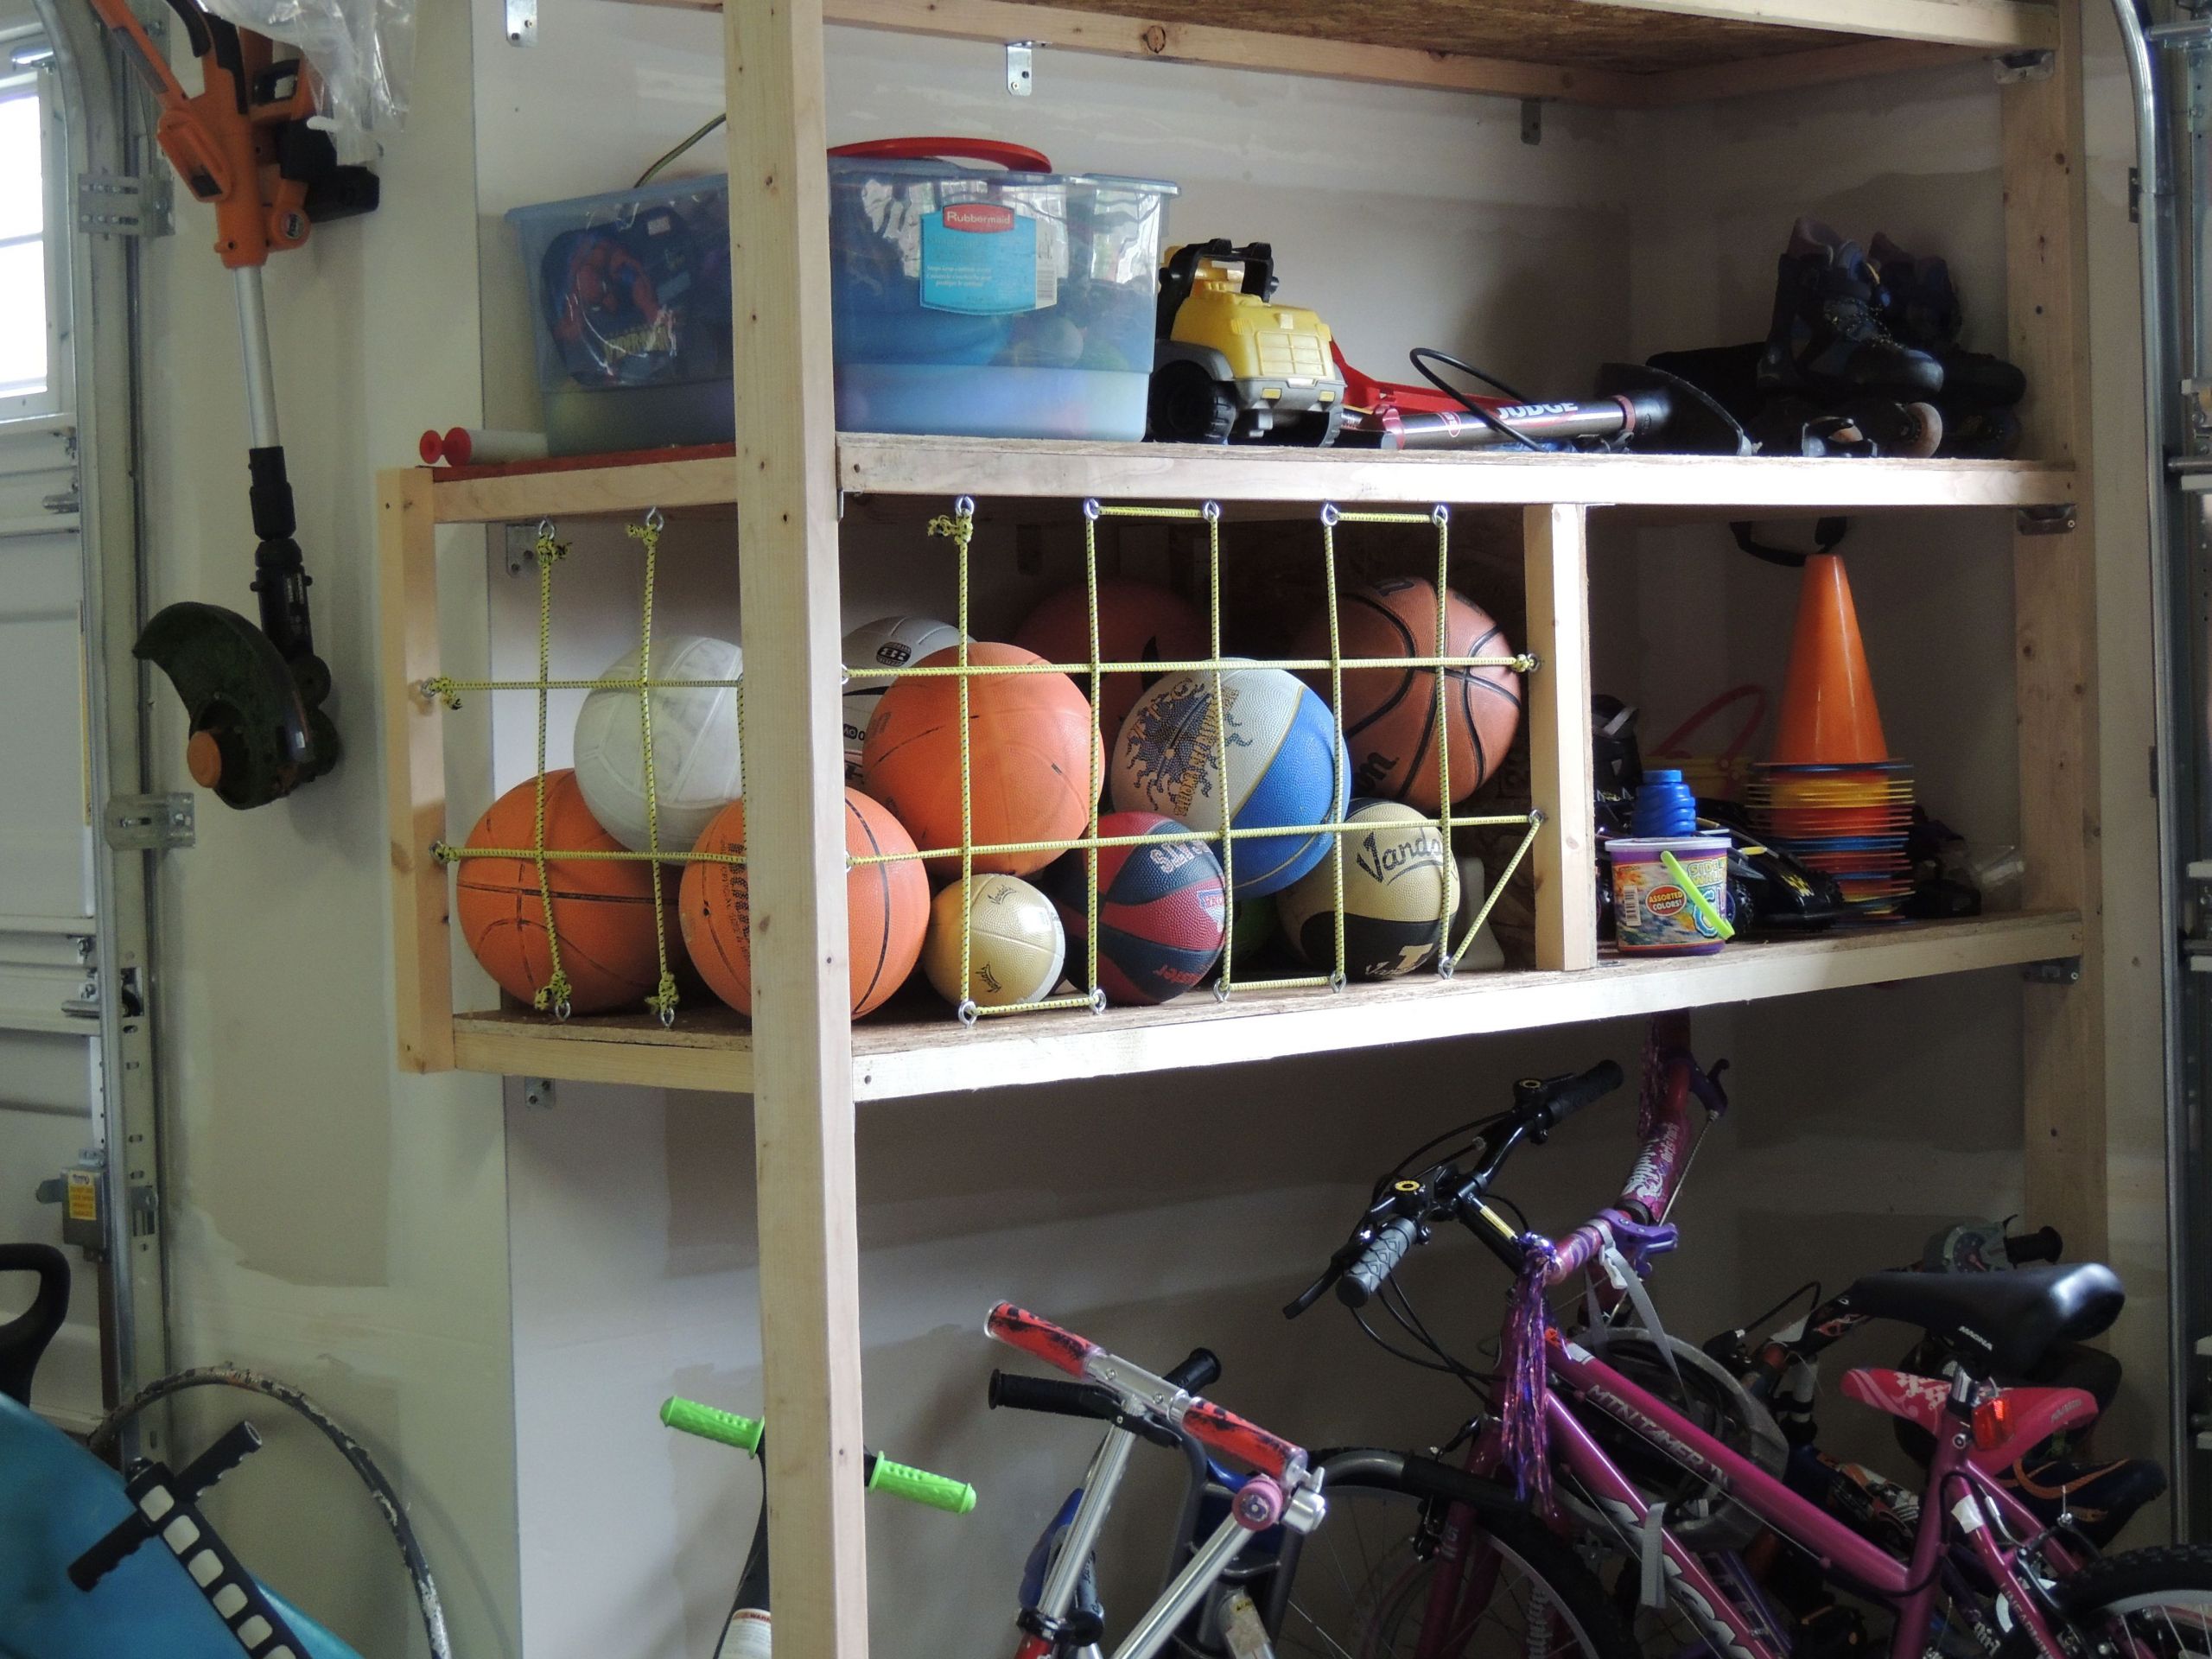 Garage Ball Organizer
 The new ball Storage in the garage Kids can easily